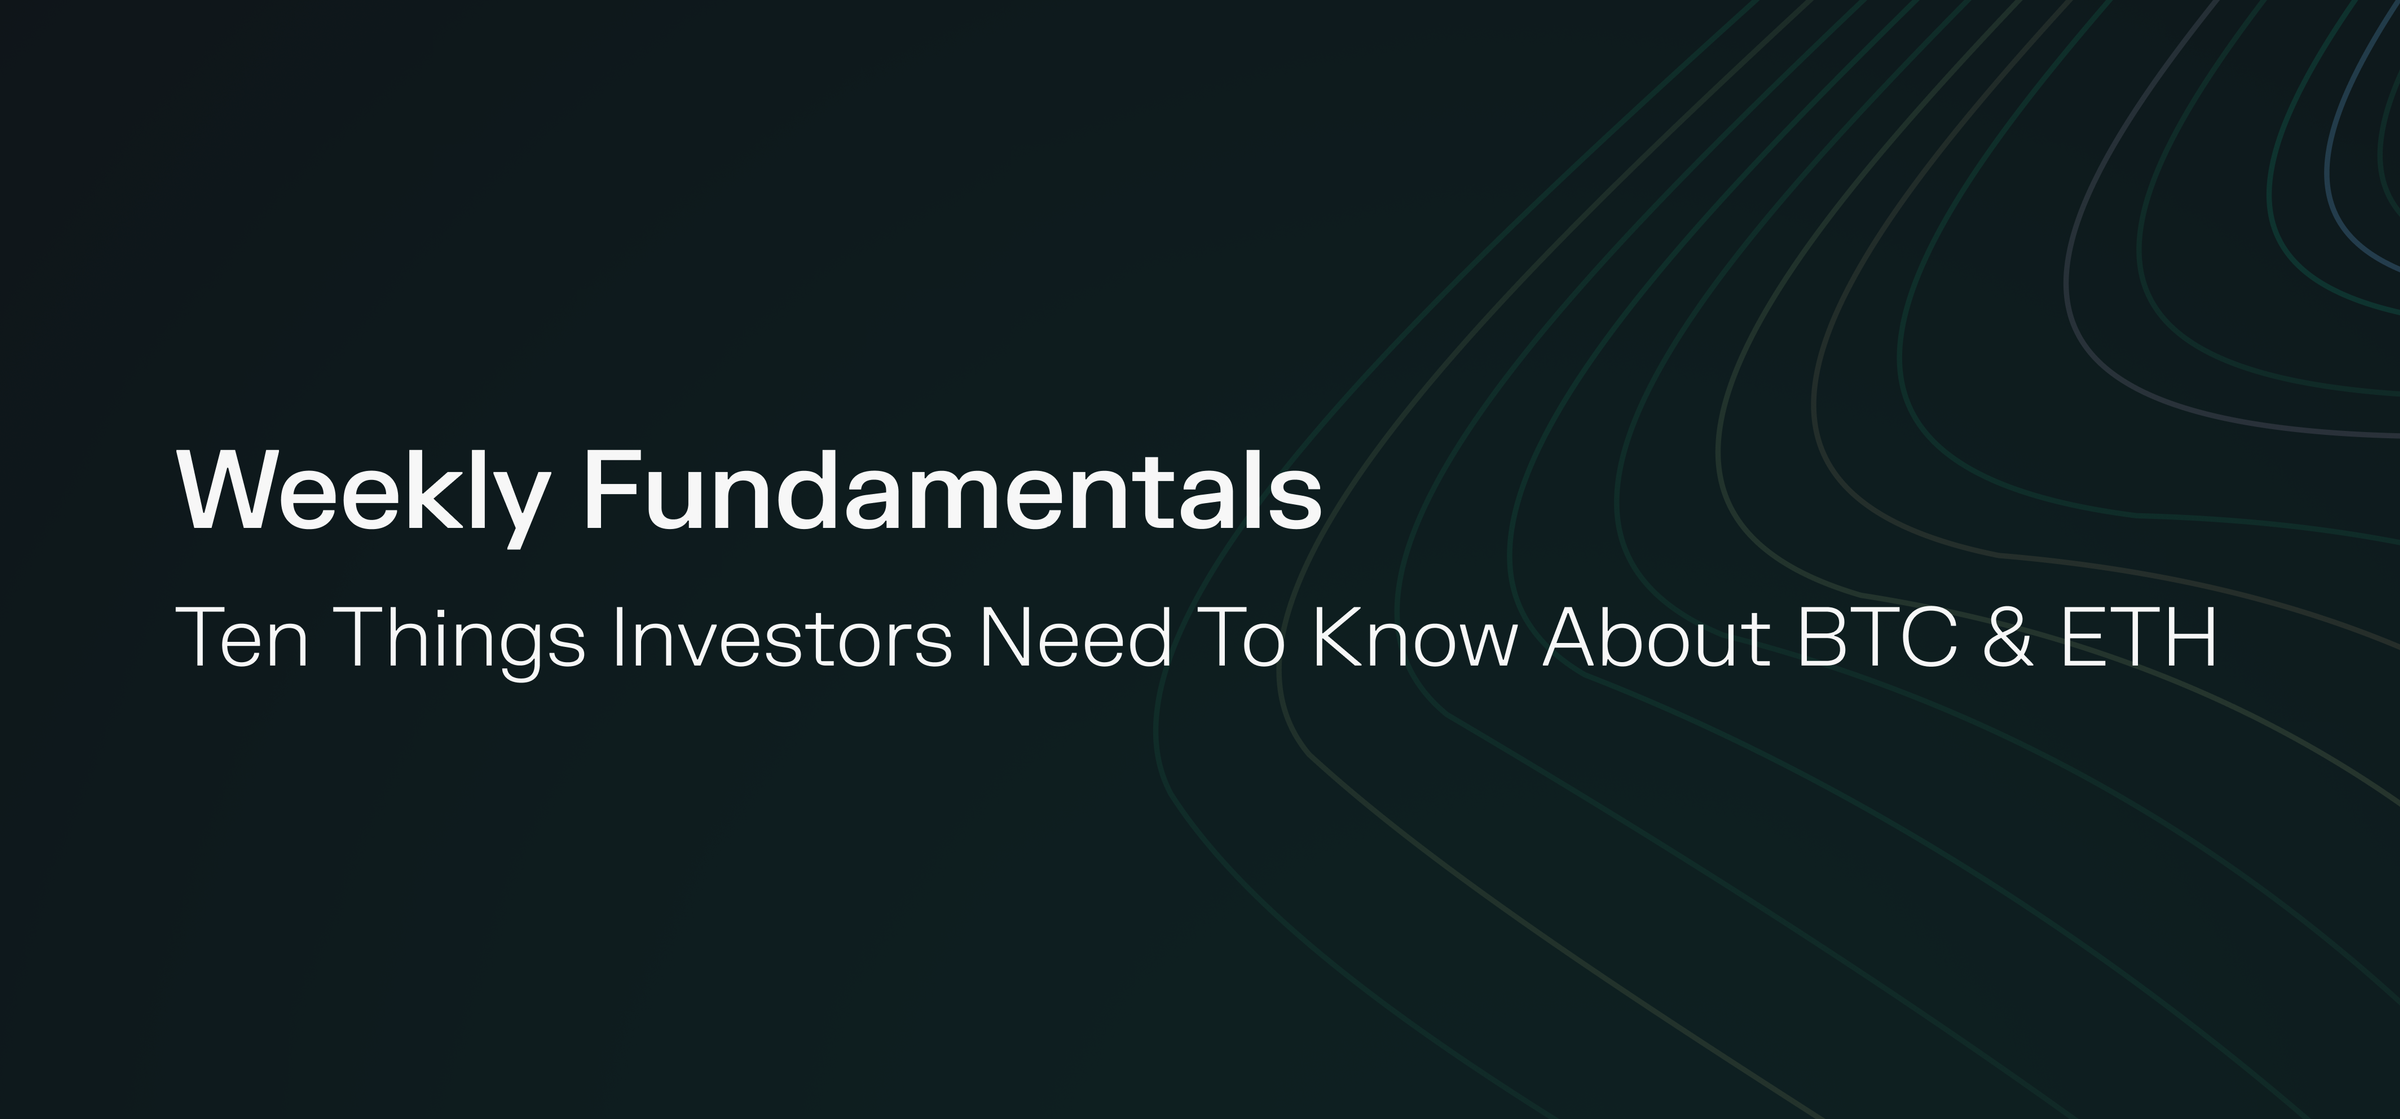 Weekly Fundamentals – Ten Things Investors Need To Know About BTC & ETH